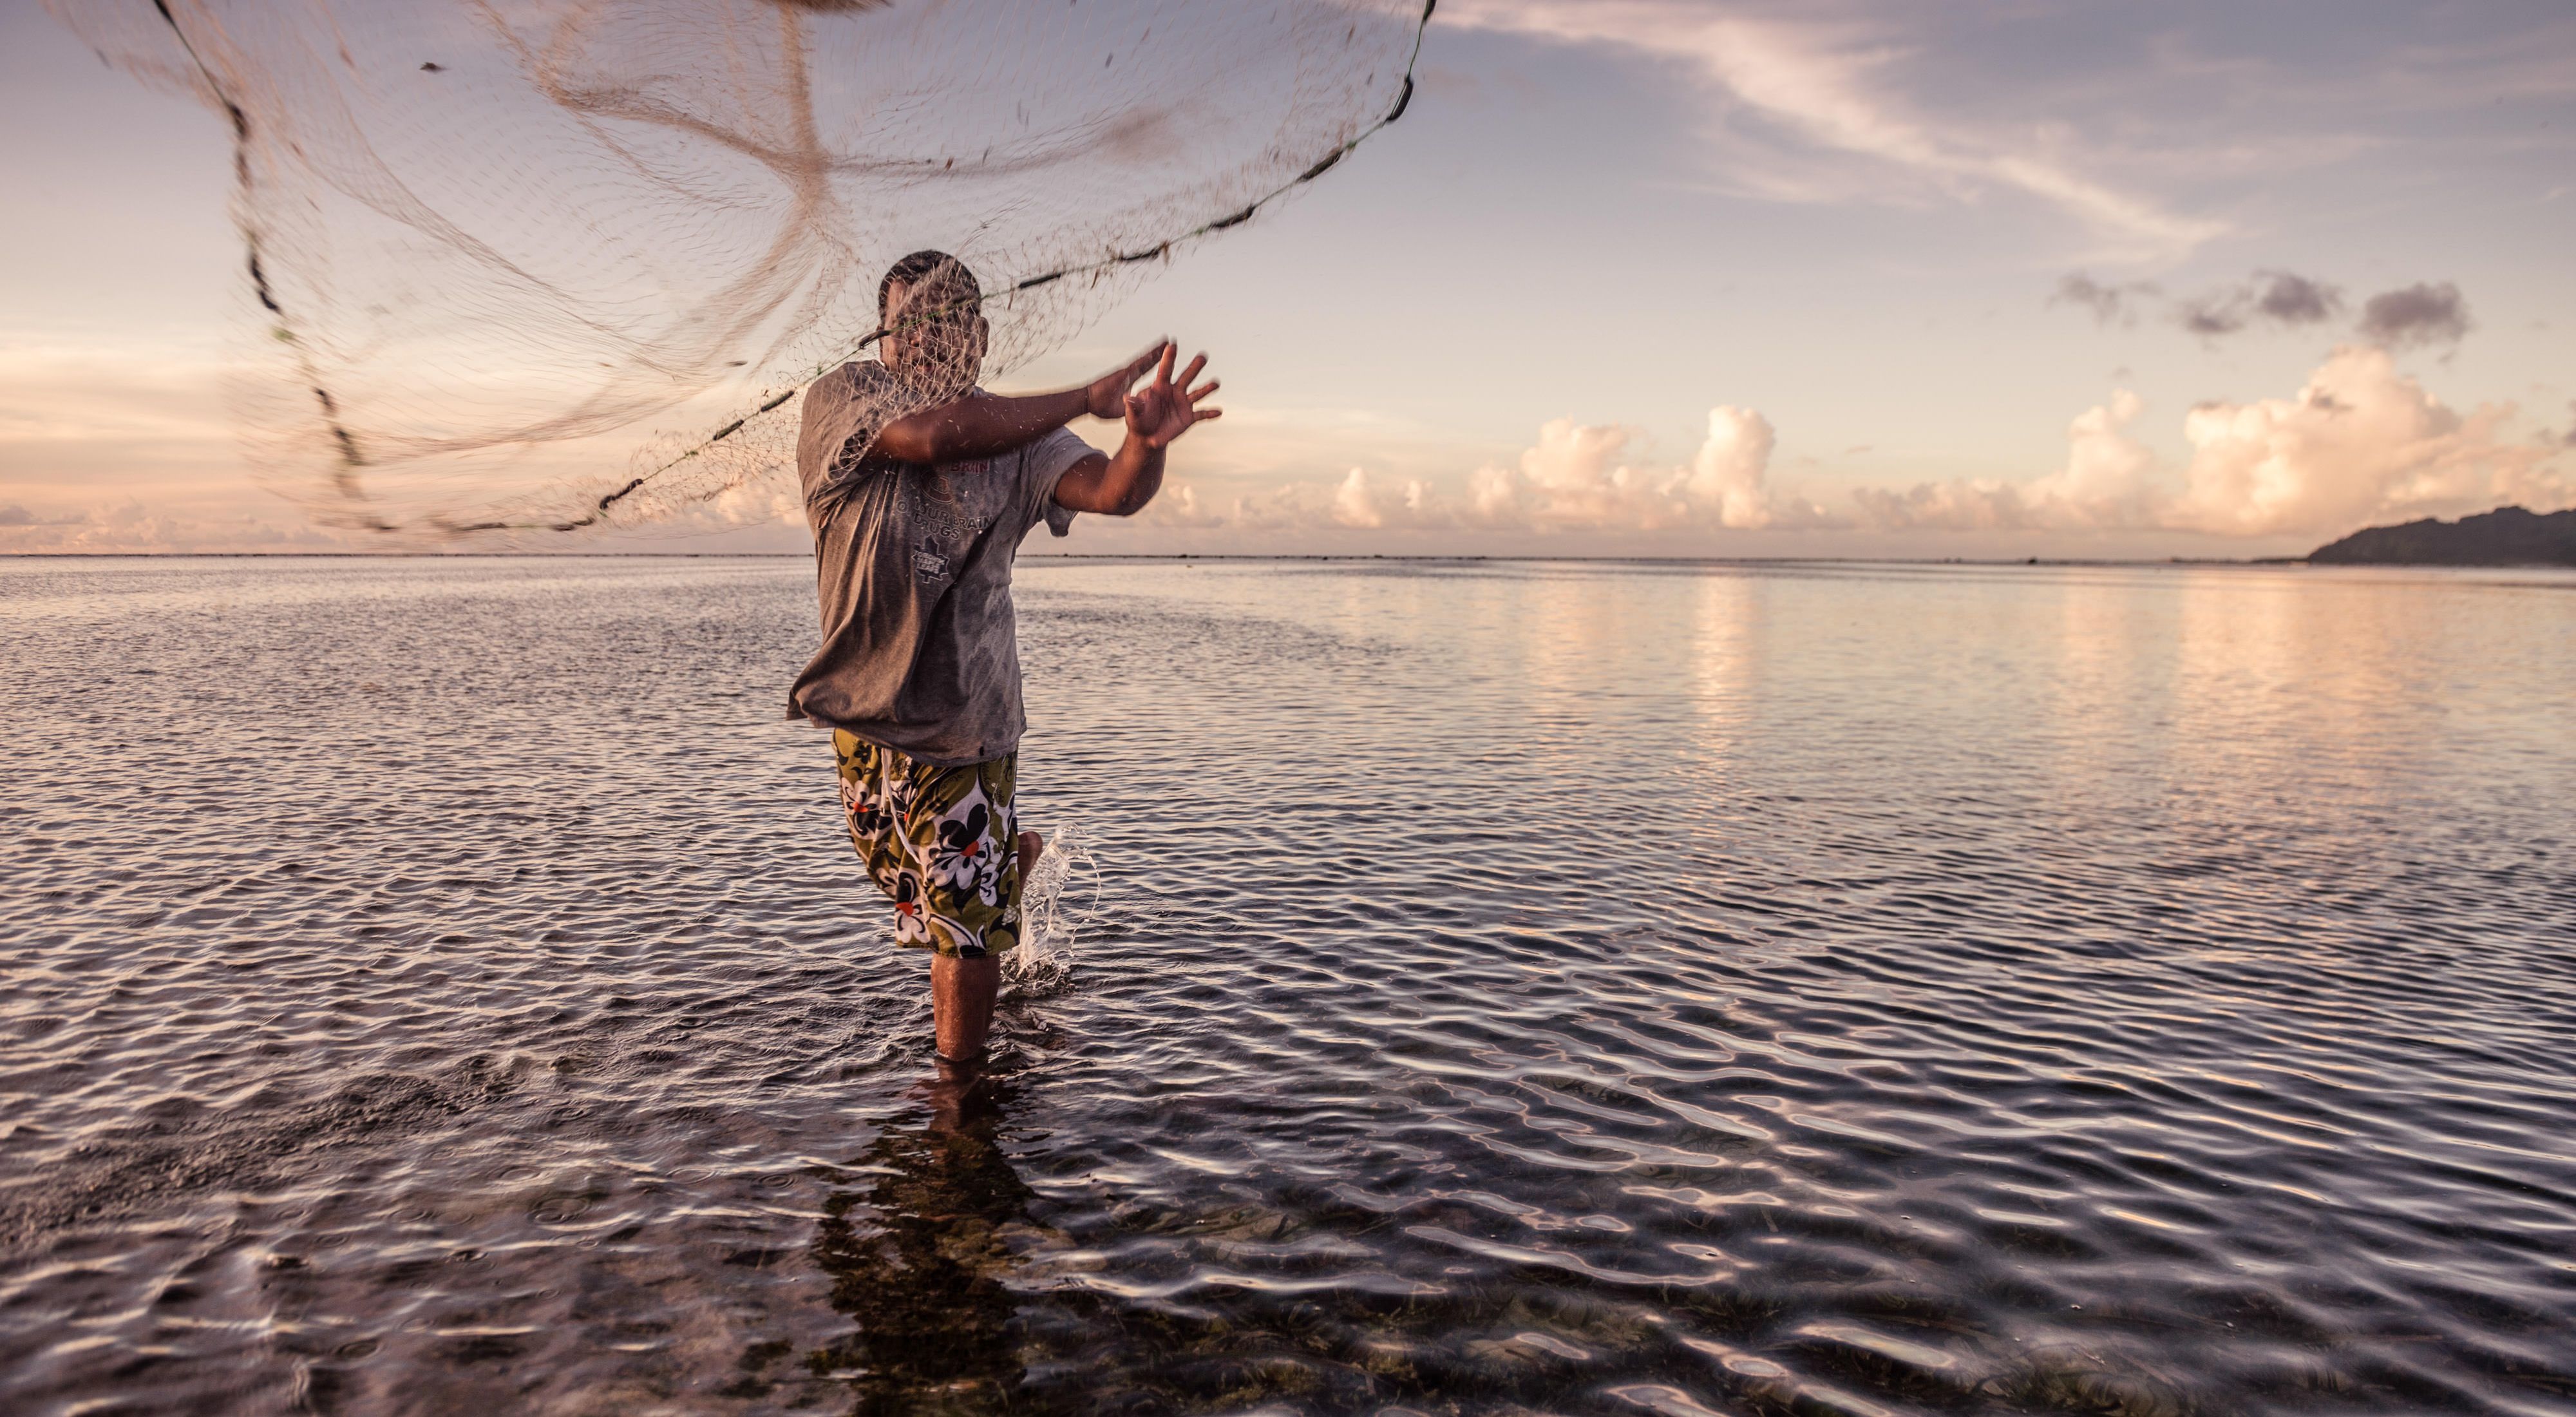 A reef fisherman from Walalung Village on the island of Kosrae, Micronesia.